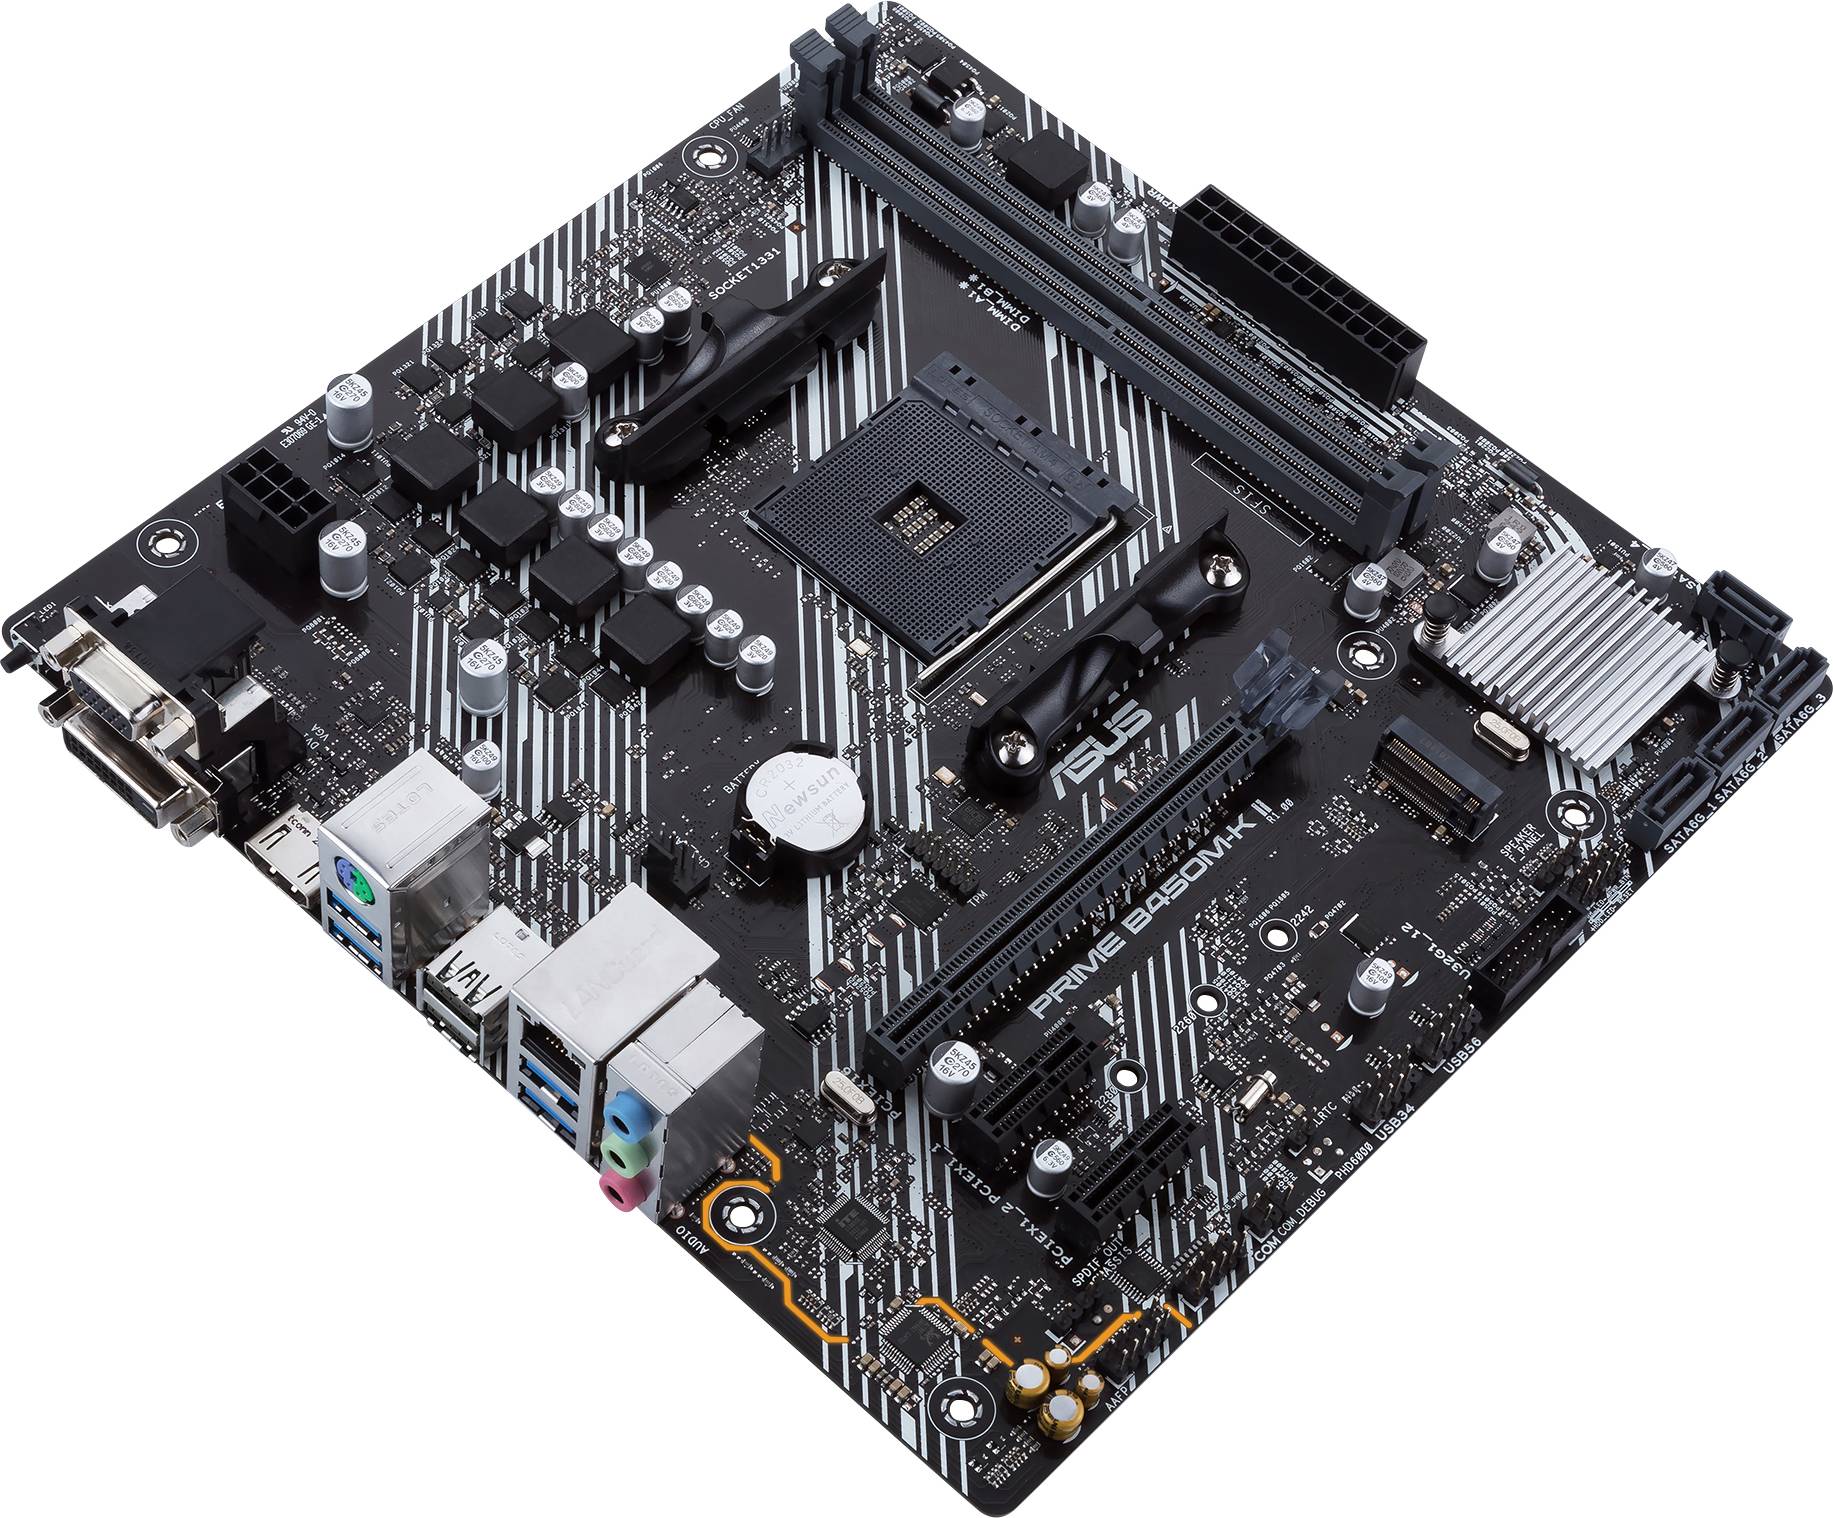 asus-prime-b450m-k-ii-motherboard-pc-base-amd-am4-form-factor-micro-atx